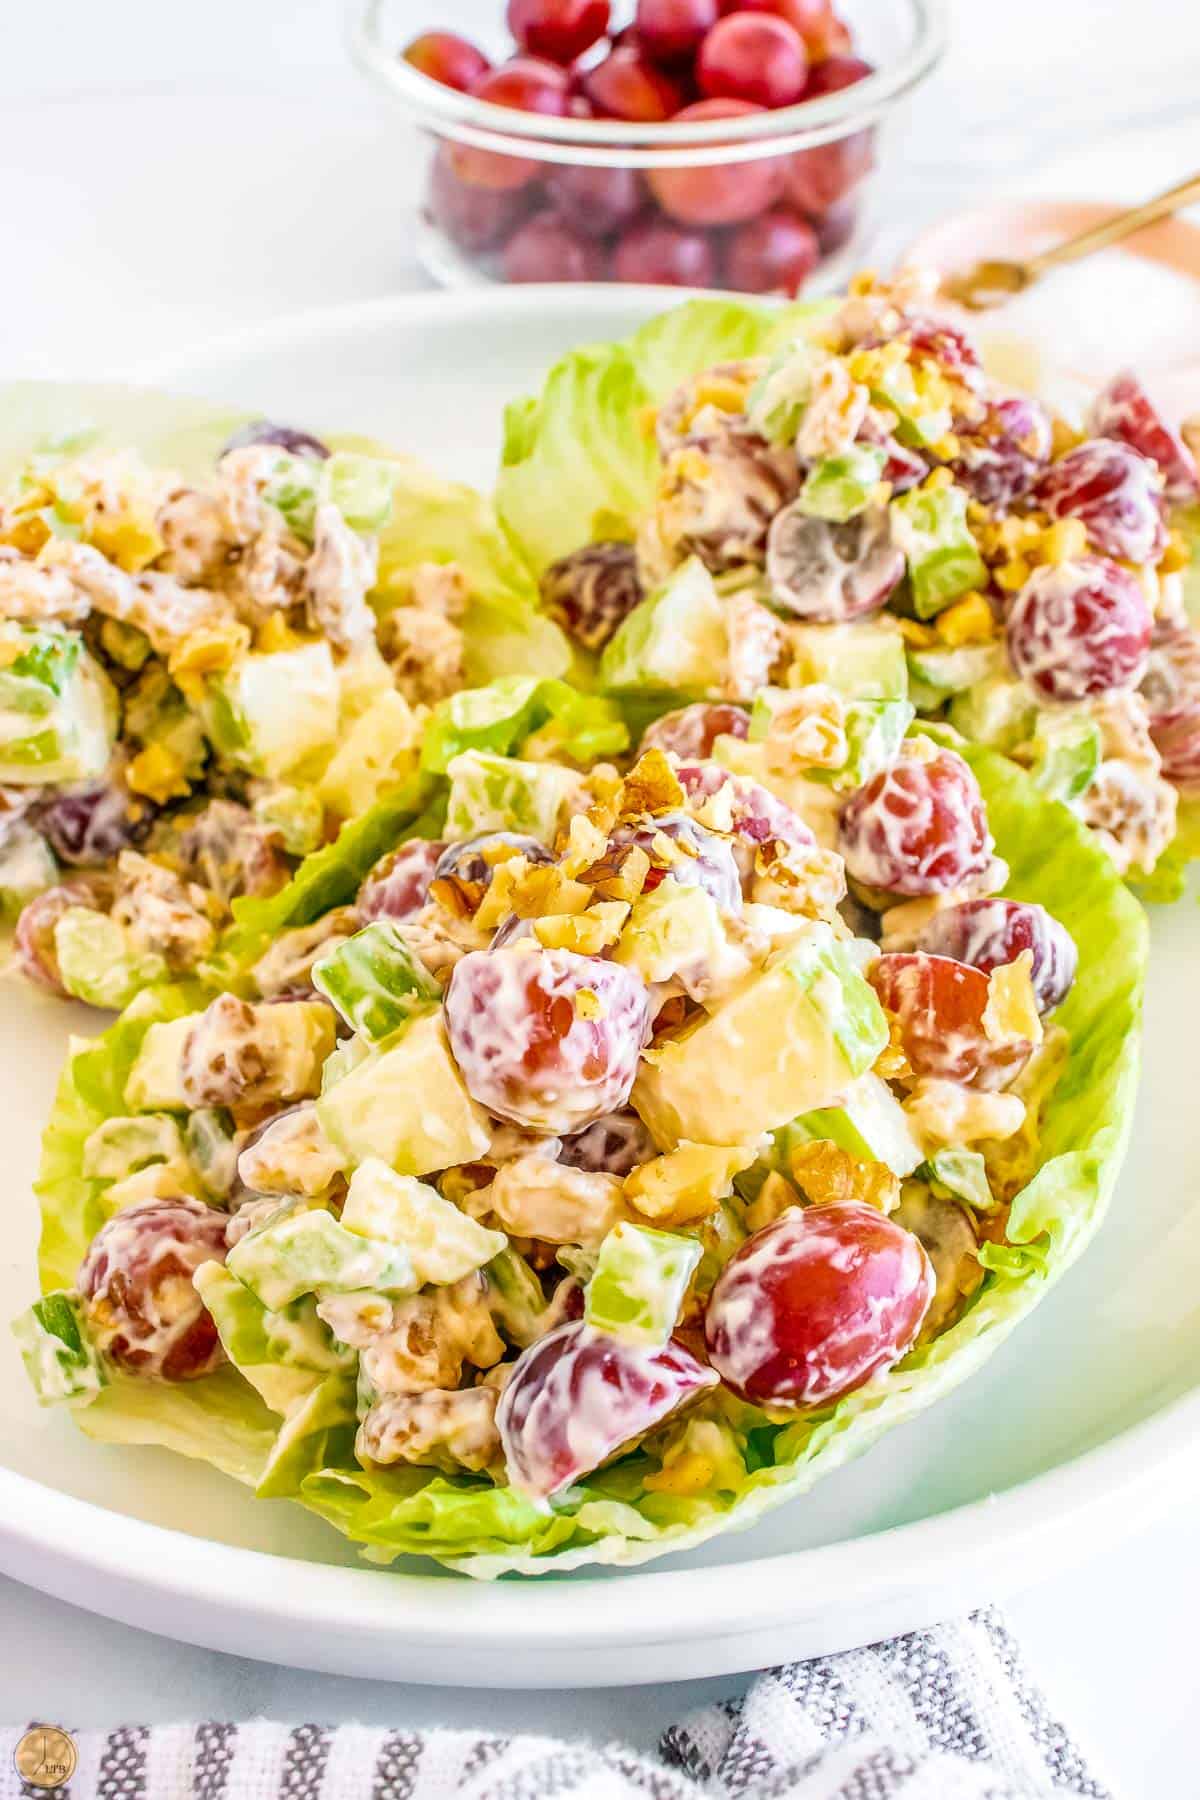 lettuce cups with waldorf salad in it on a plate